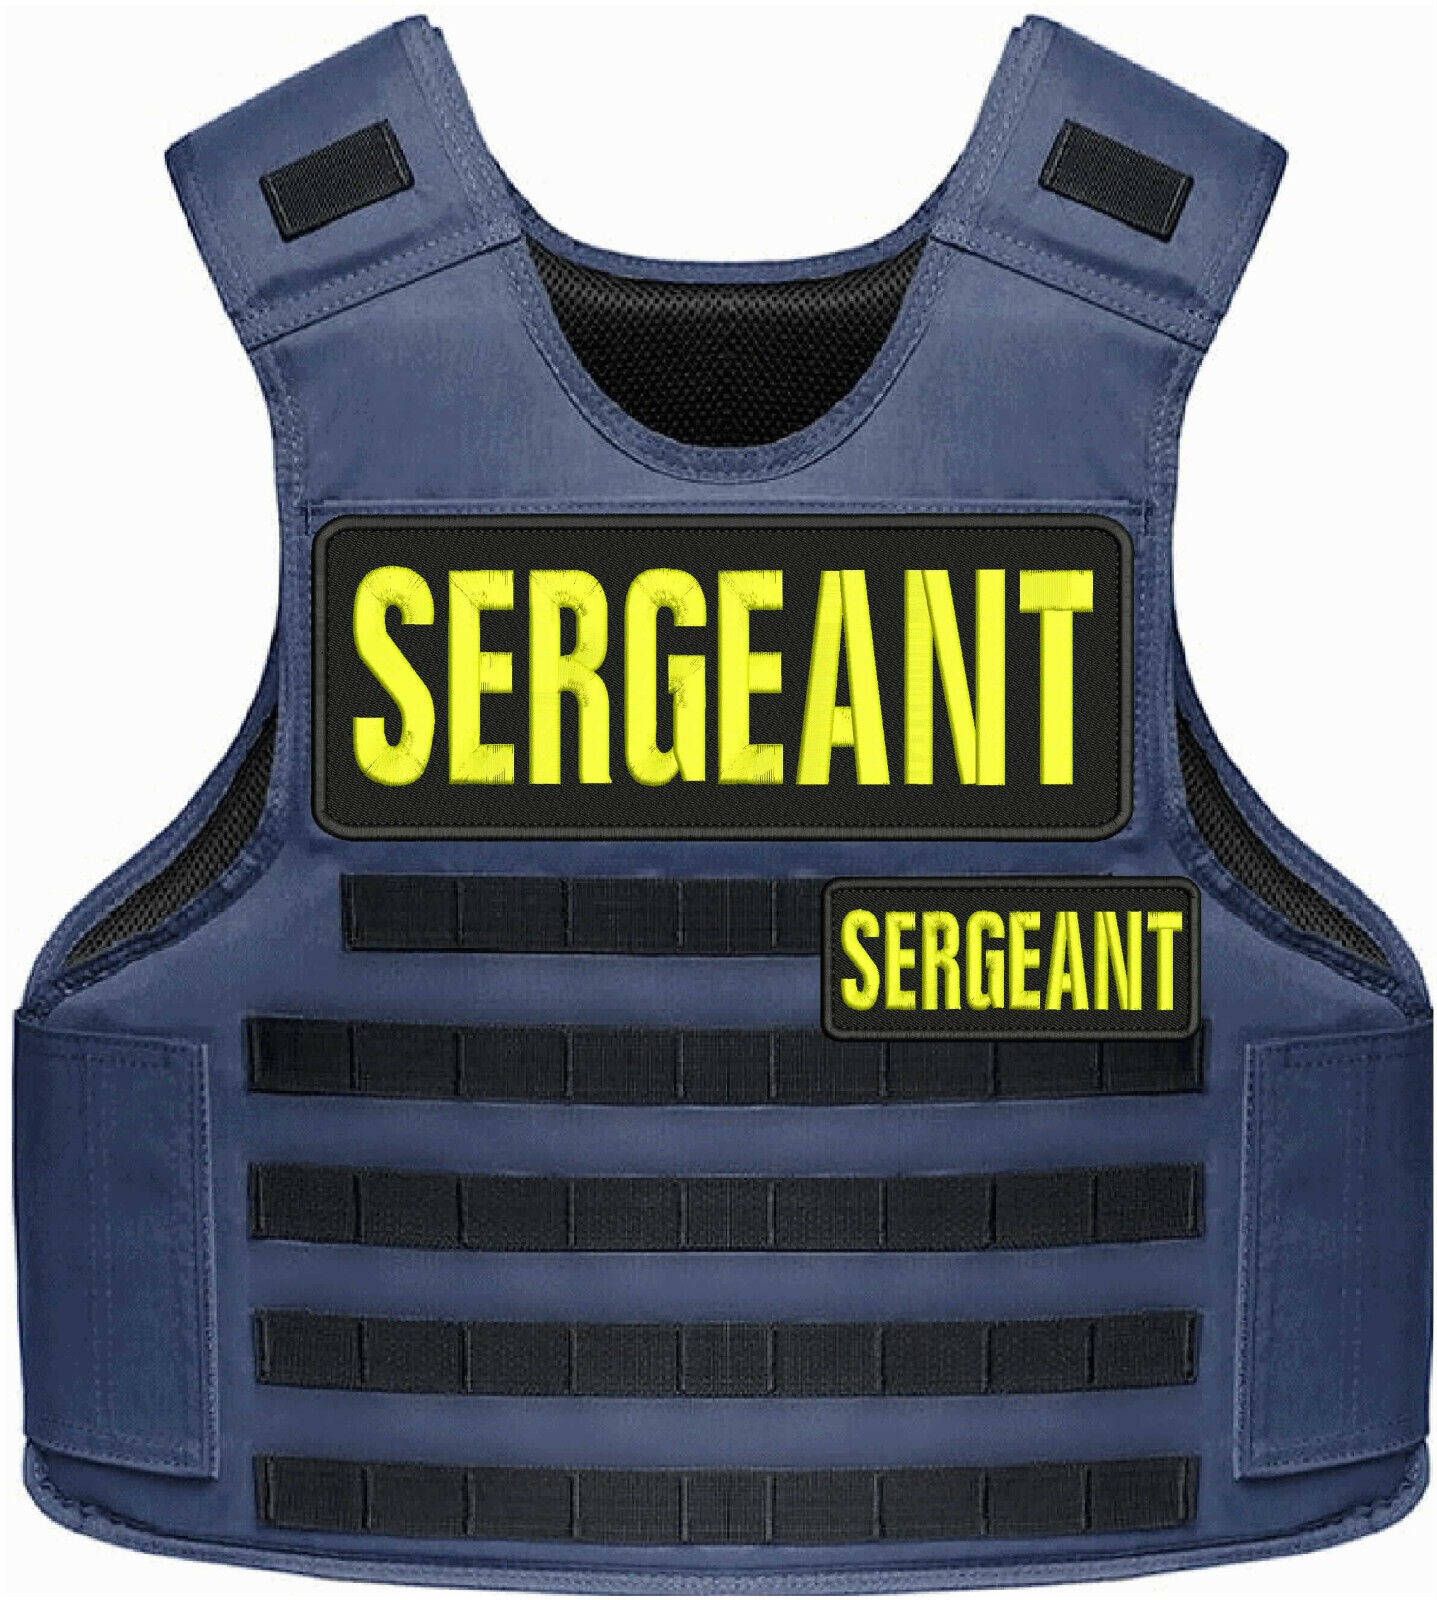 SERGEANT EMBROIDERY PATCH 4X11 AND 2X5 VELCR@ ON BACK Yellow ON BLACK